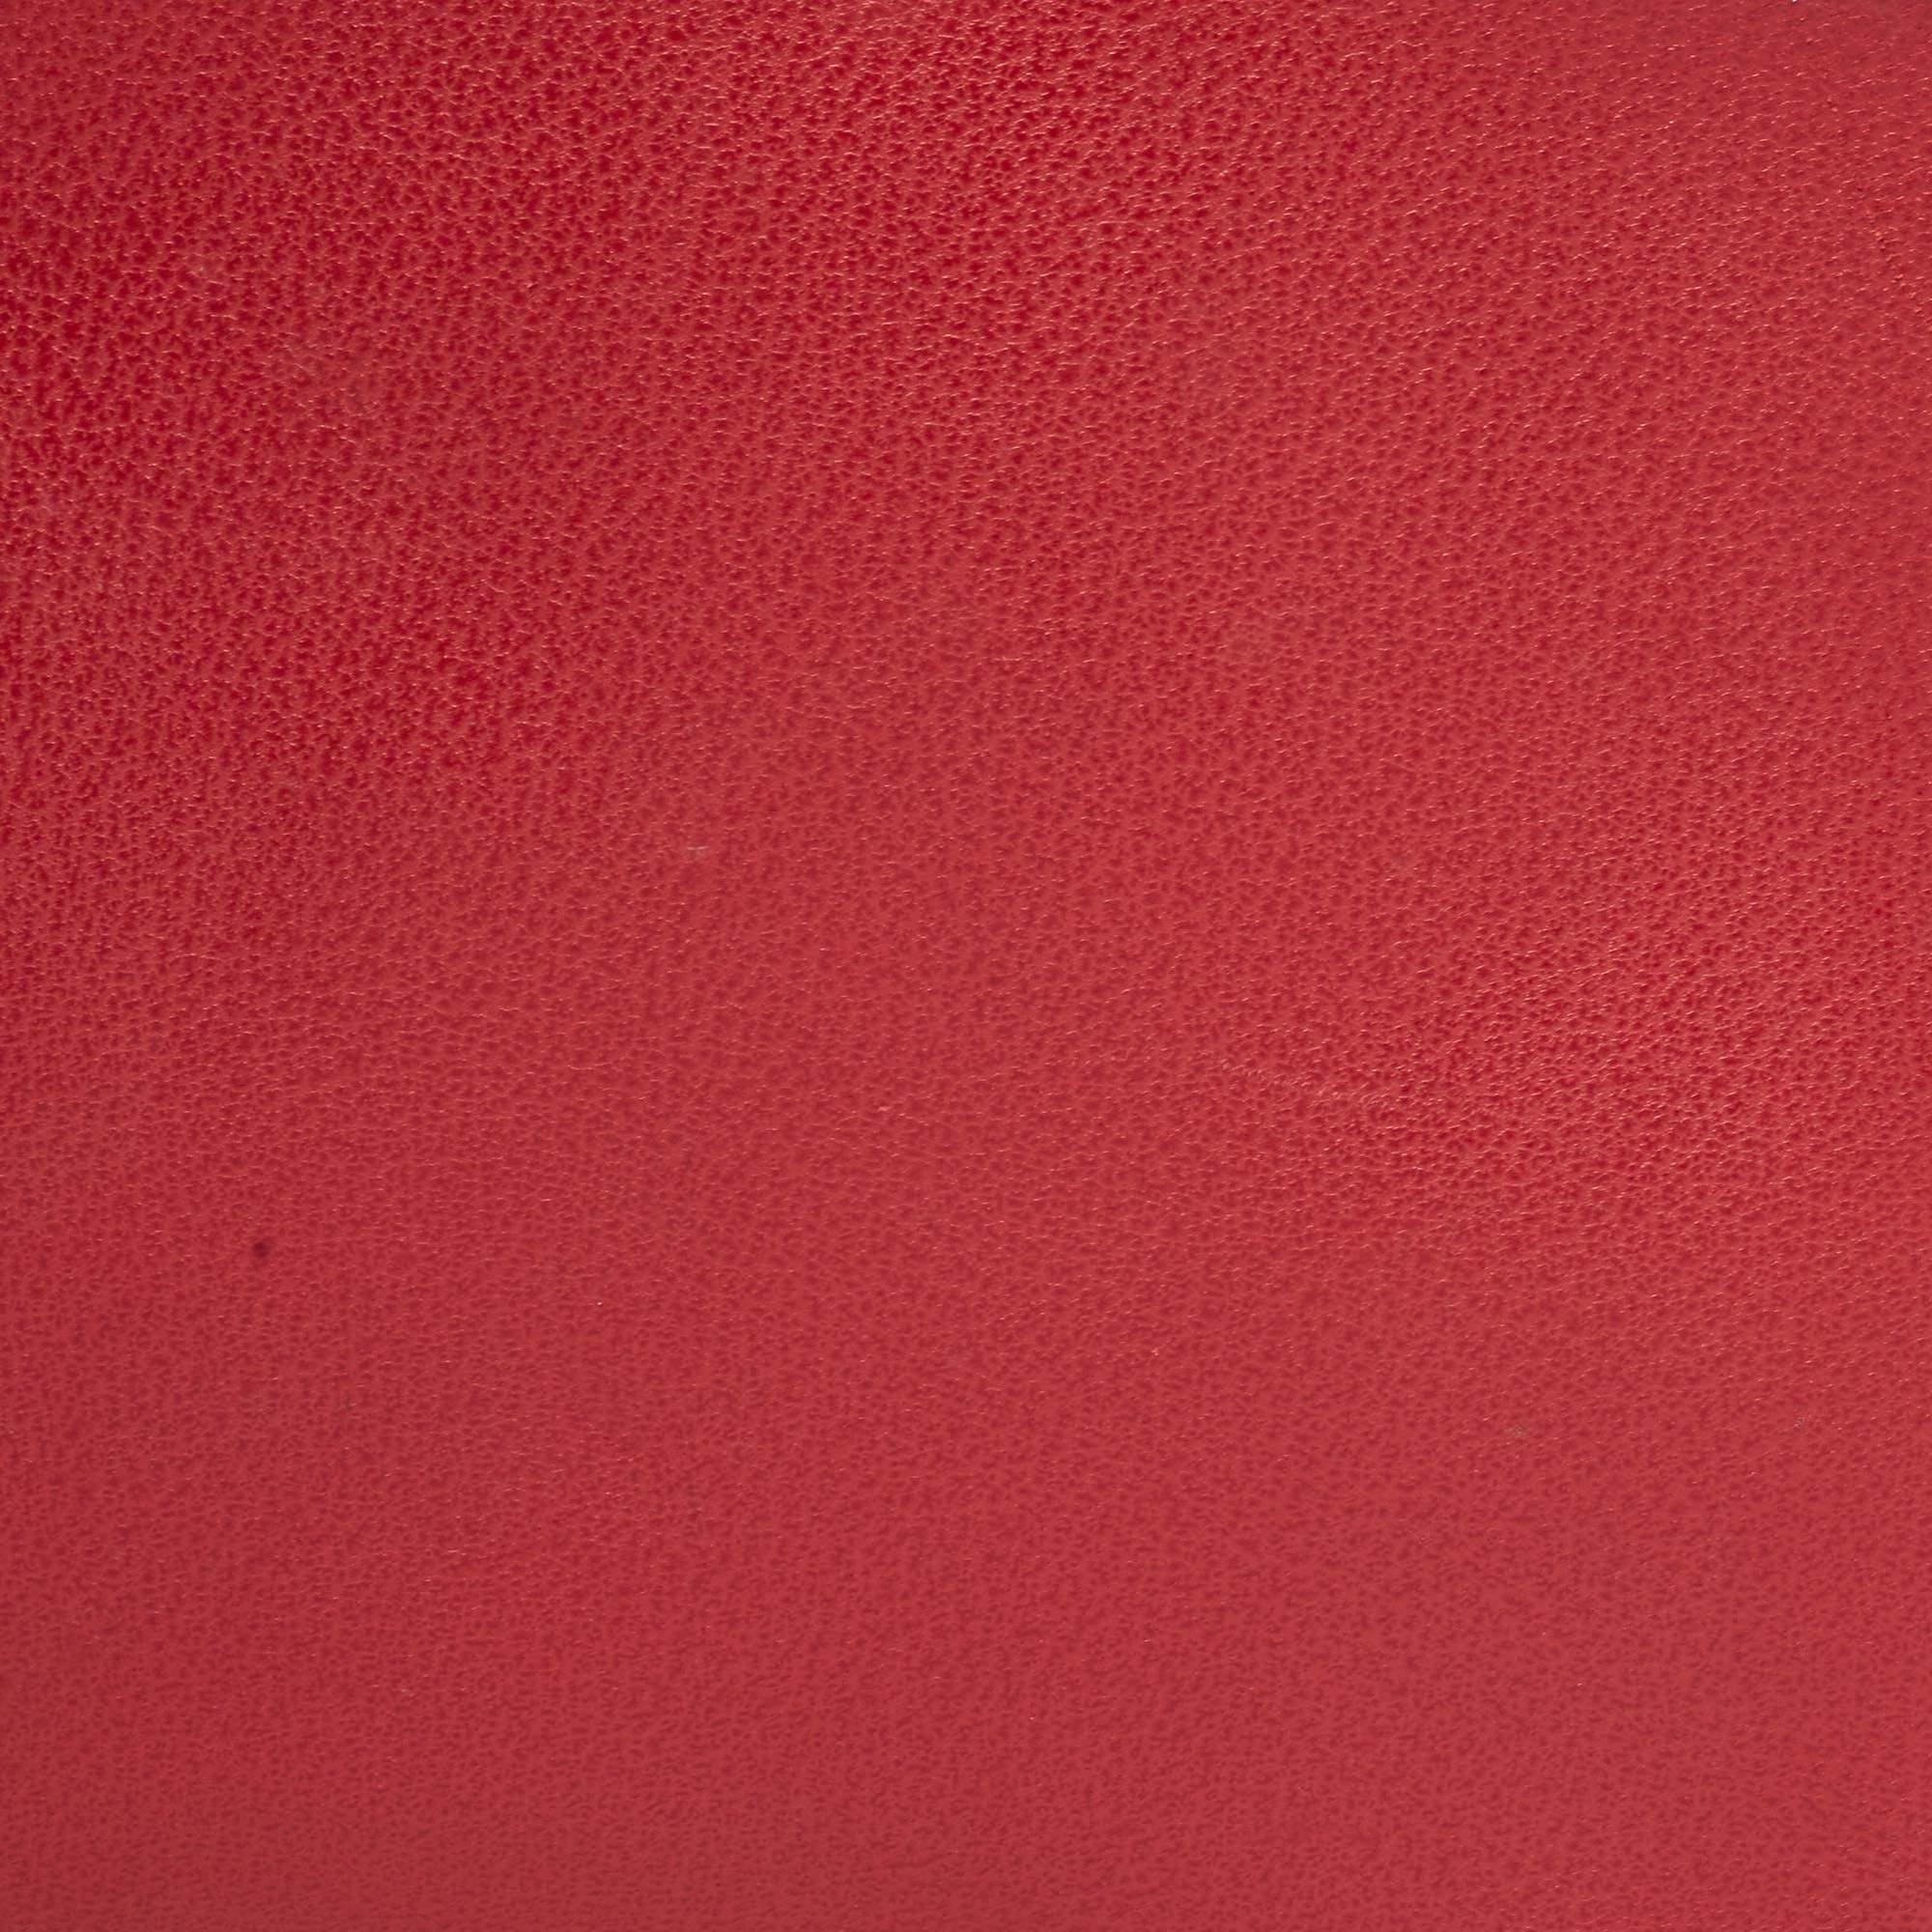 Gucci Red Leather Briefcase Bag For Sale 13